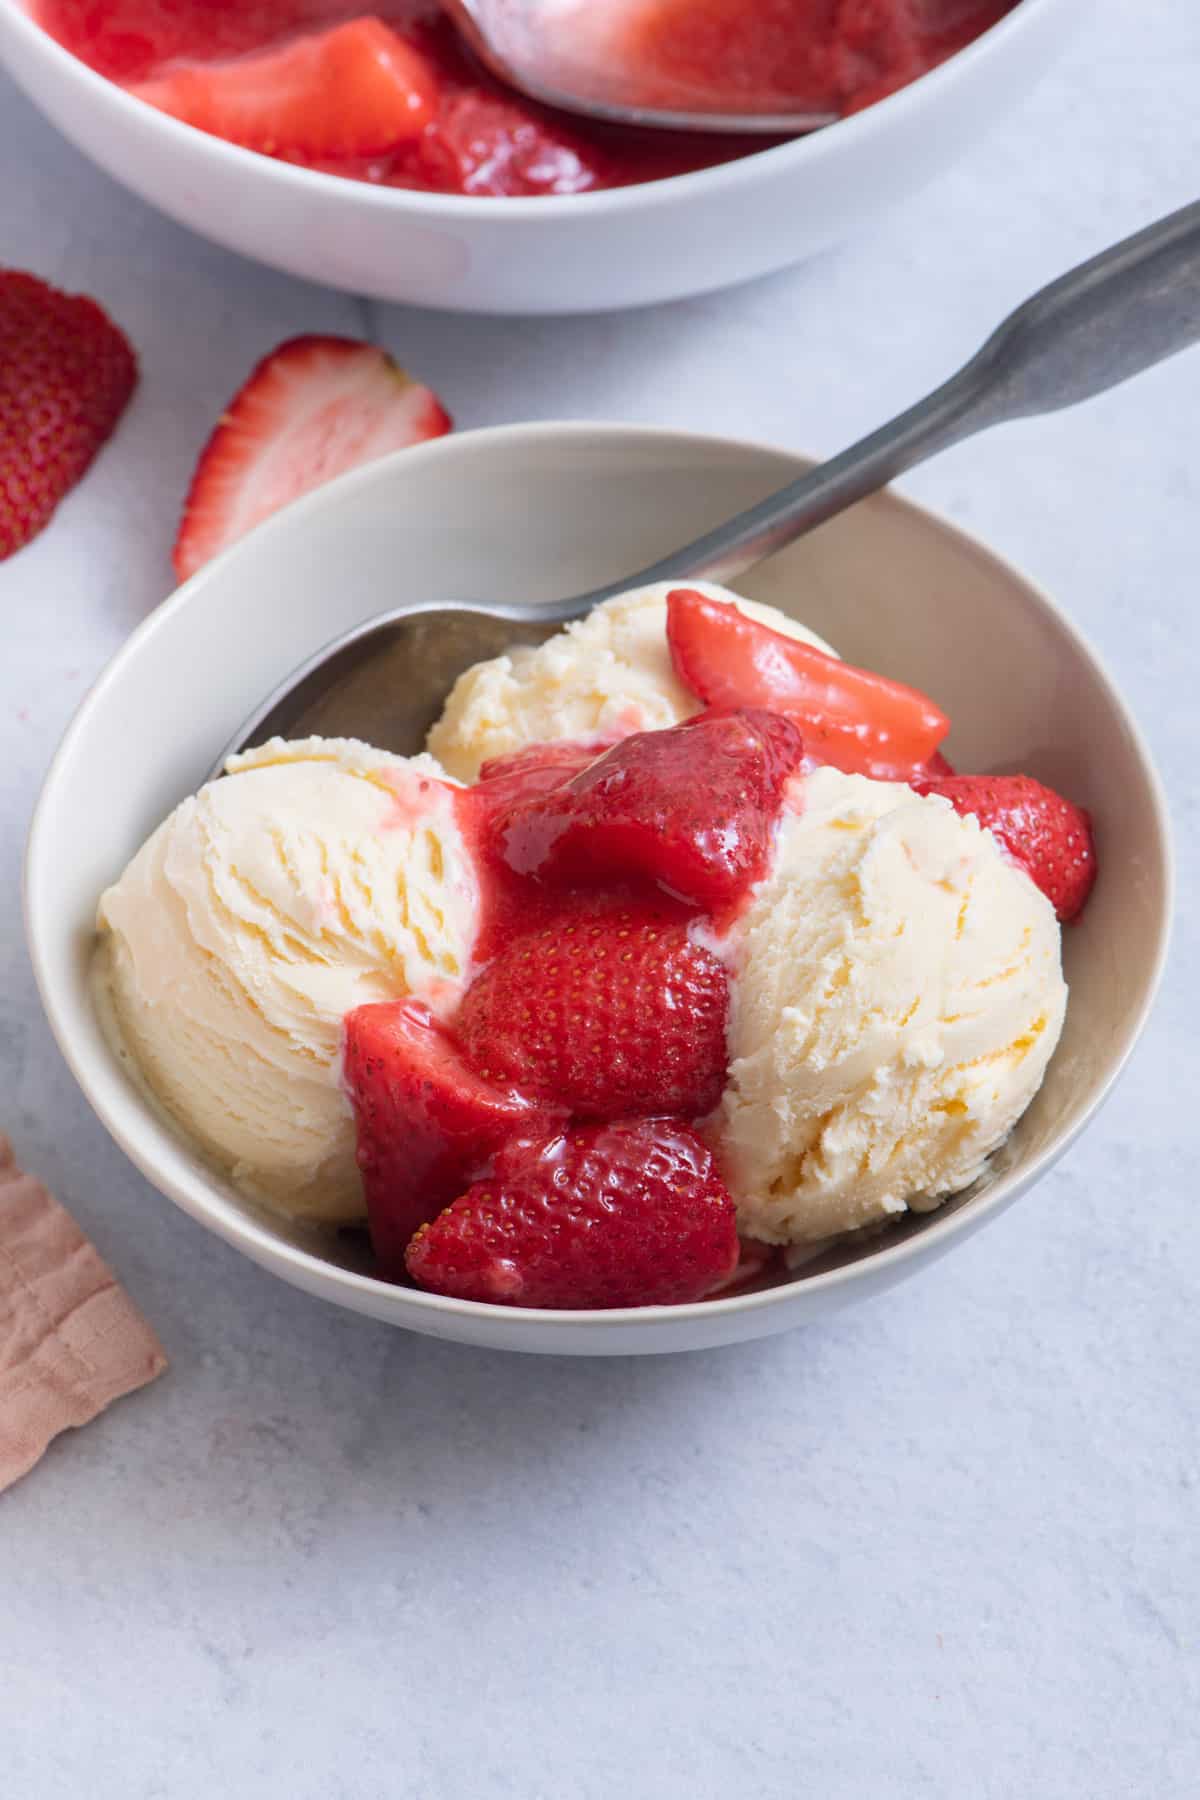 Bowl with 3 scoops of ice cream topped with strawberry sauce.